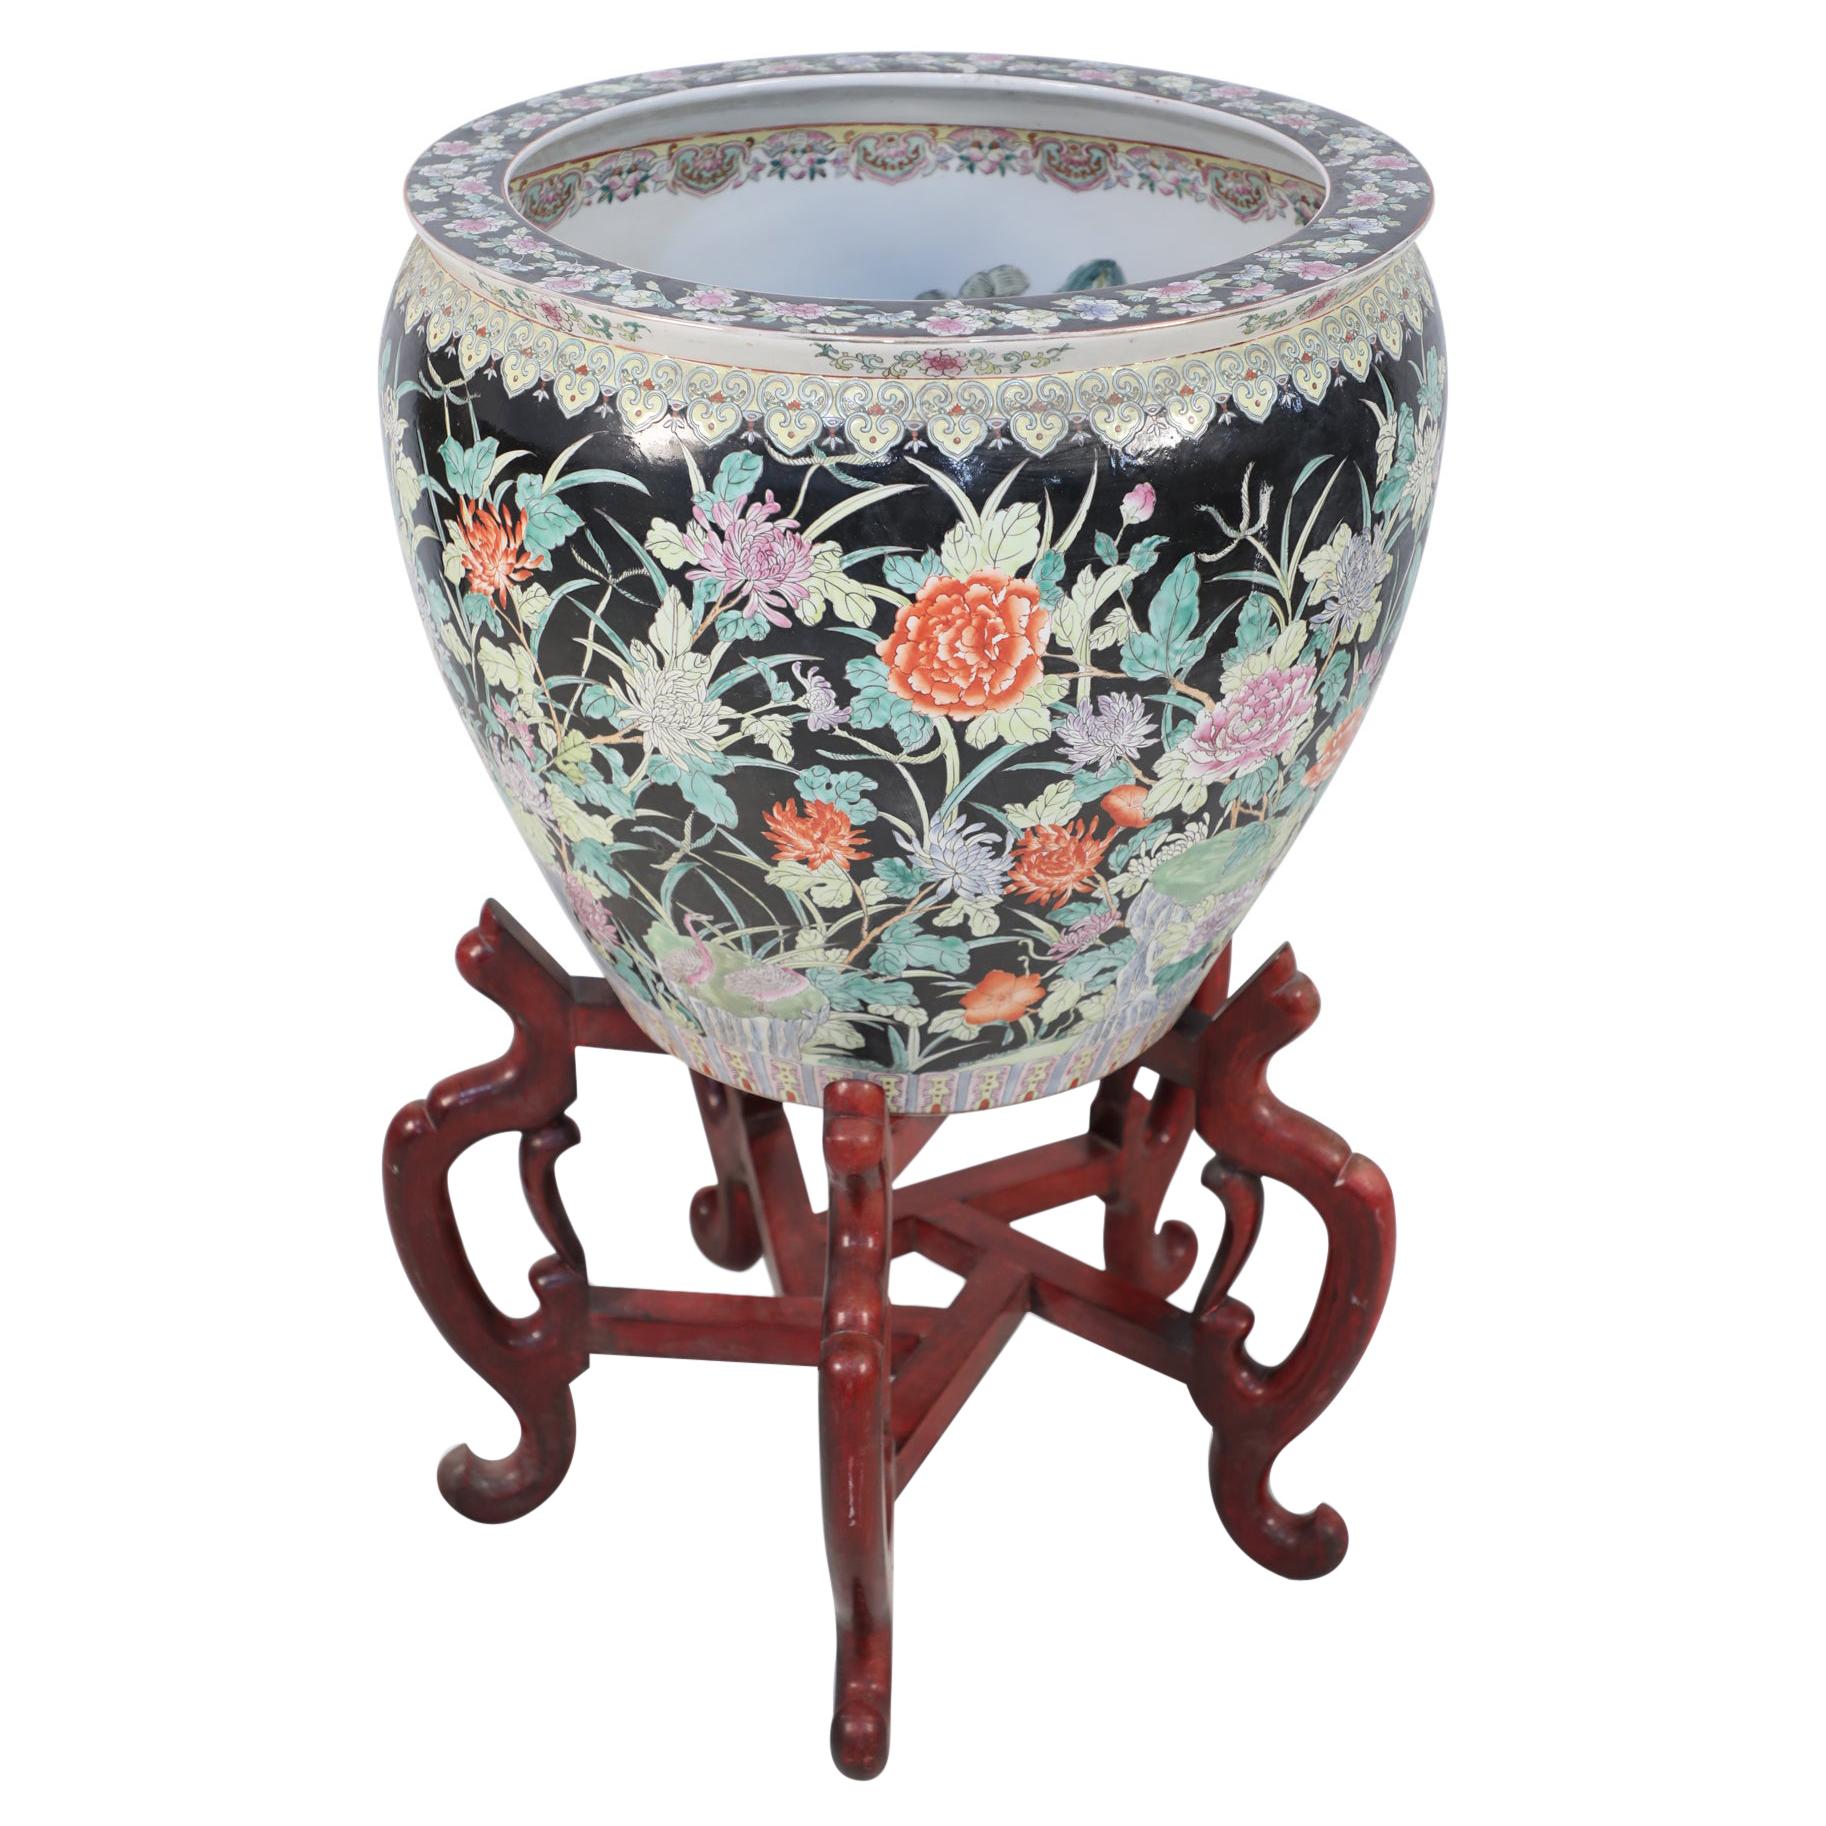 Chinese Floral Porcelain Planter with Wooden Stand